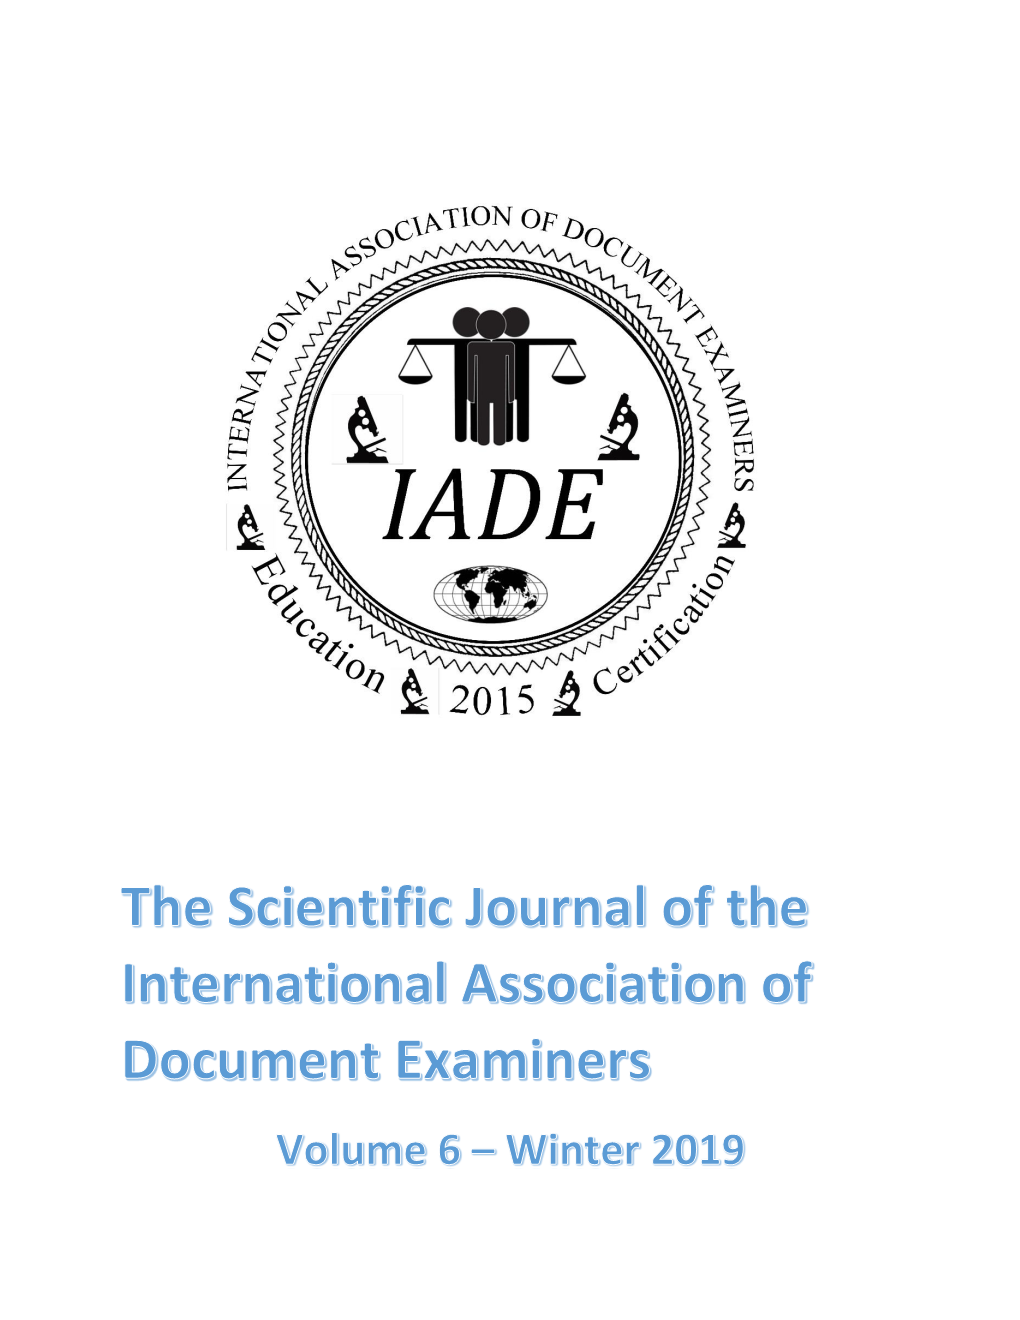 The Scientific Journal of the International Association of Document Examiners Page 1